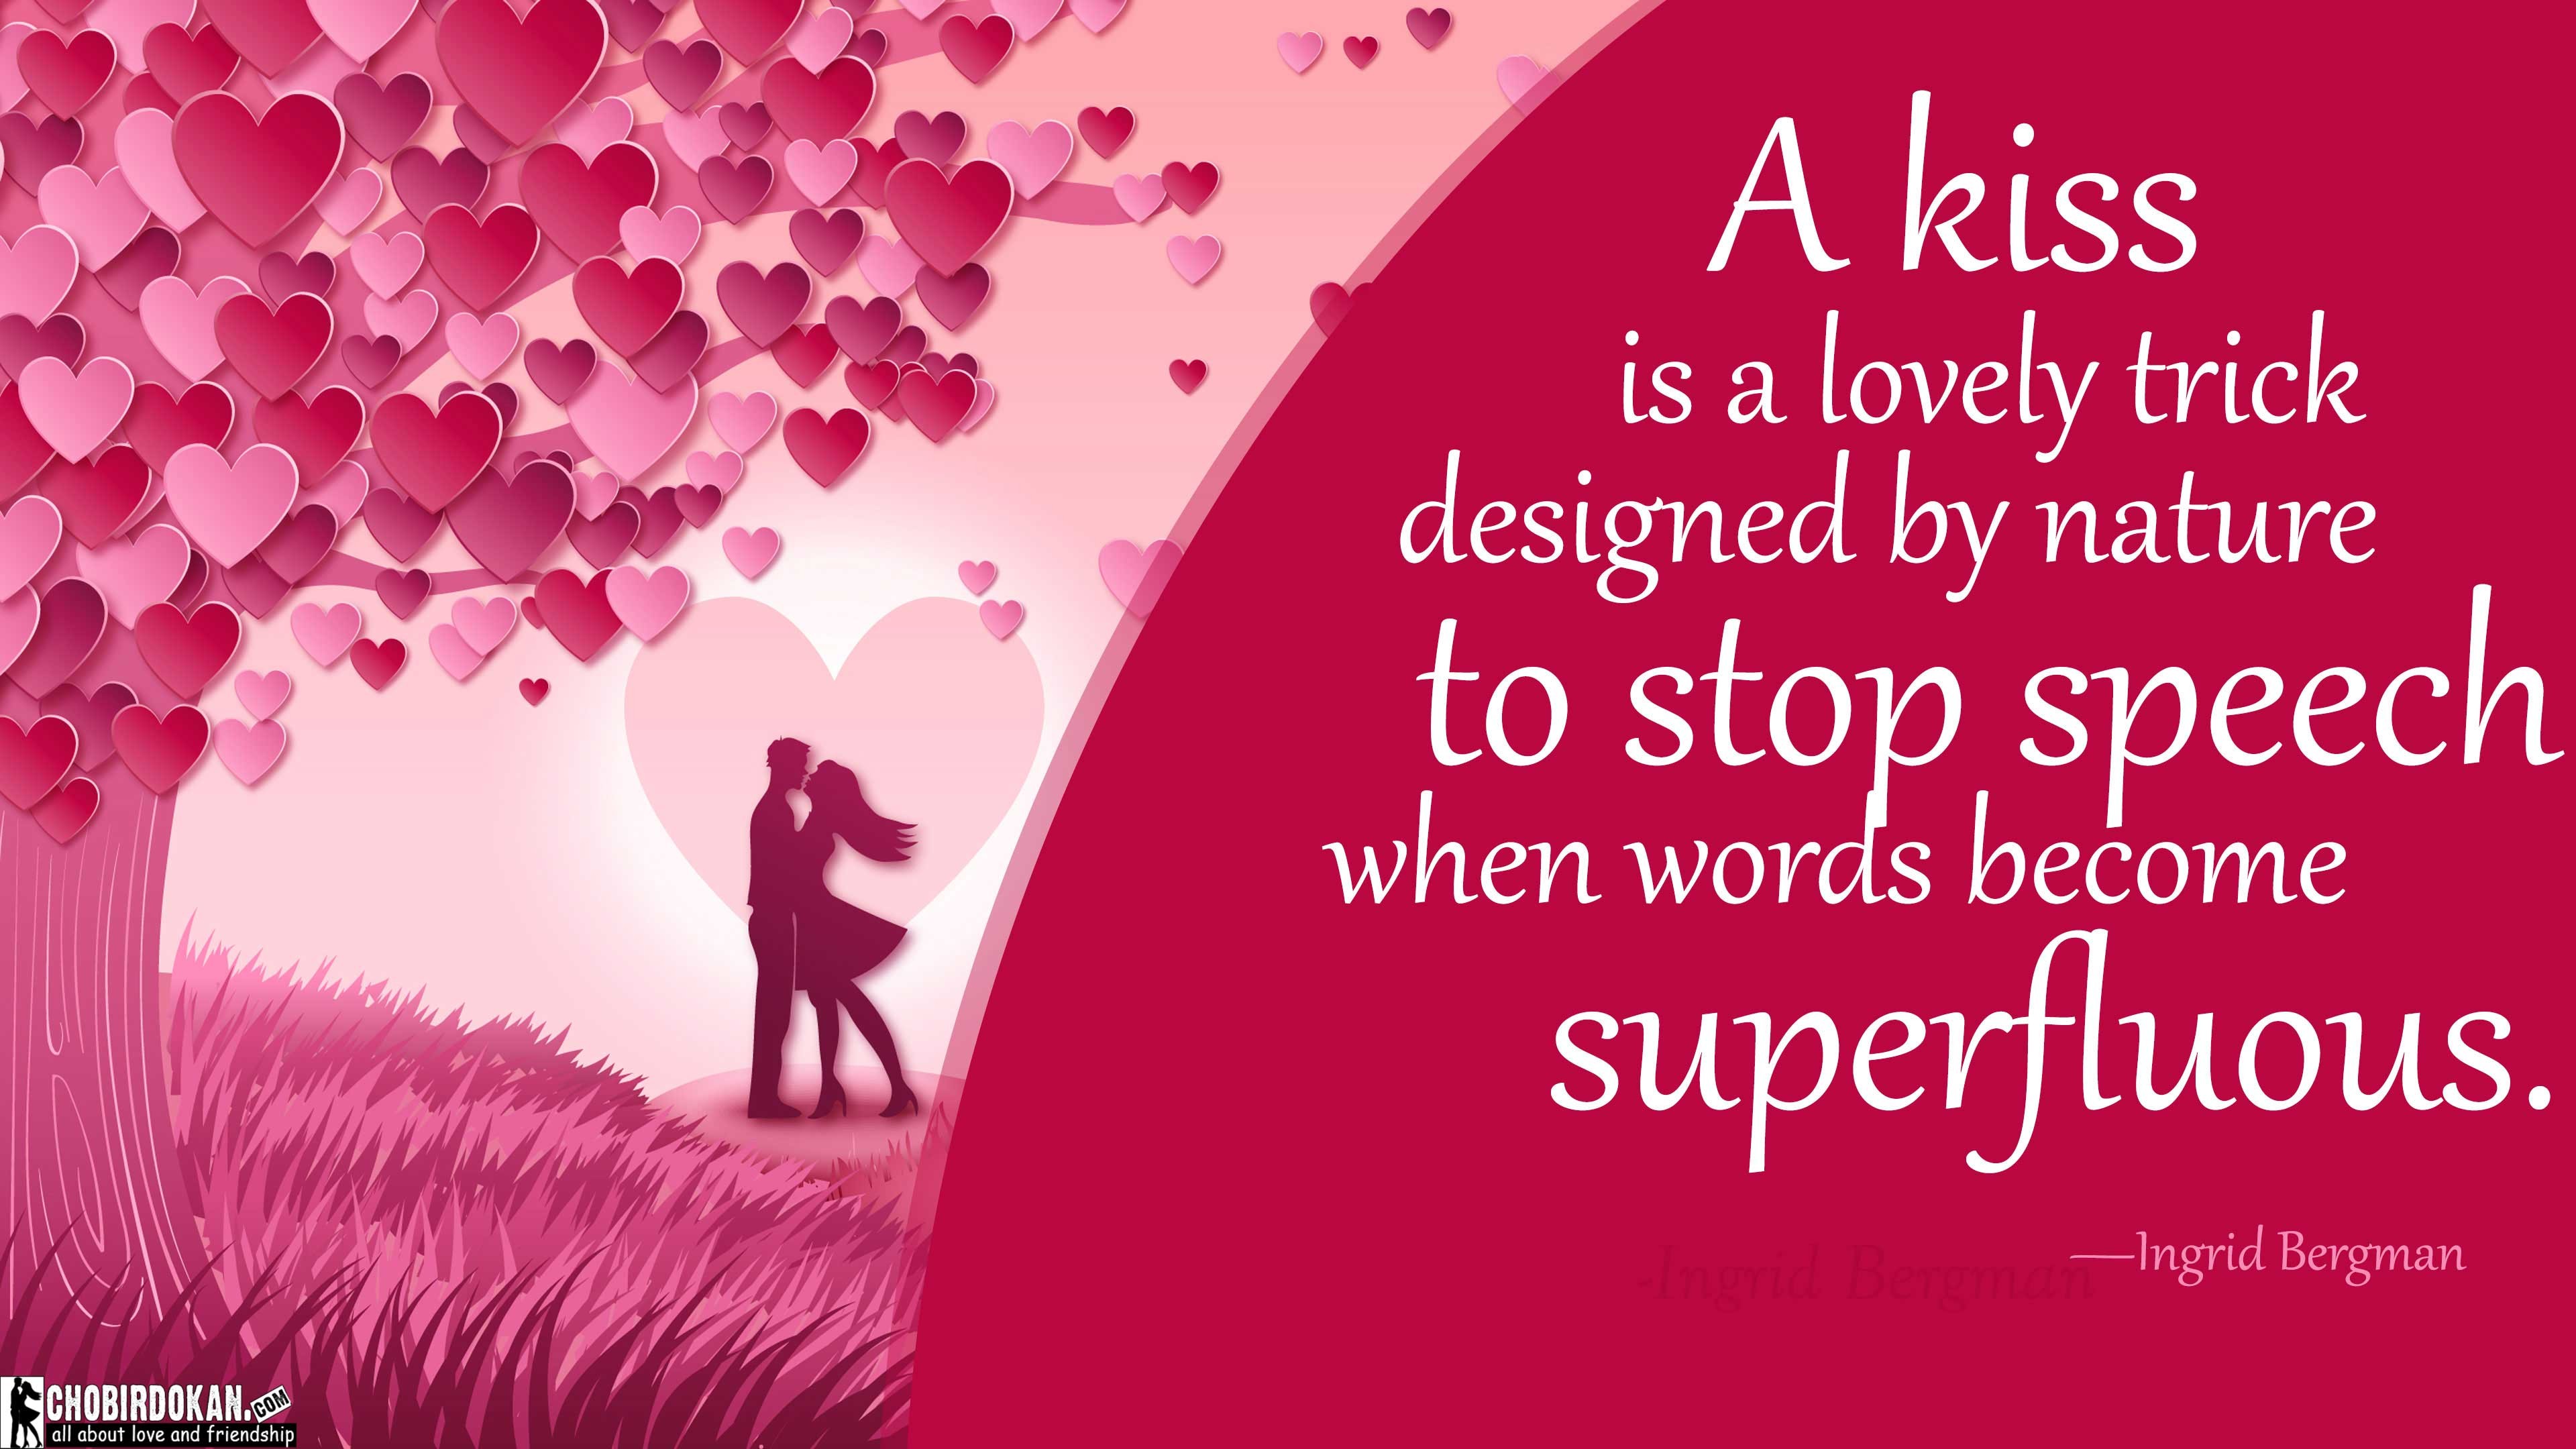 3840x2160 Cute Kissing Quotes Images For Her/Him -Best Love Kiss Quotes.